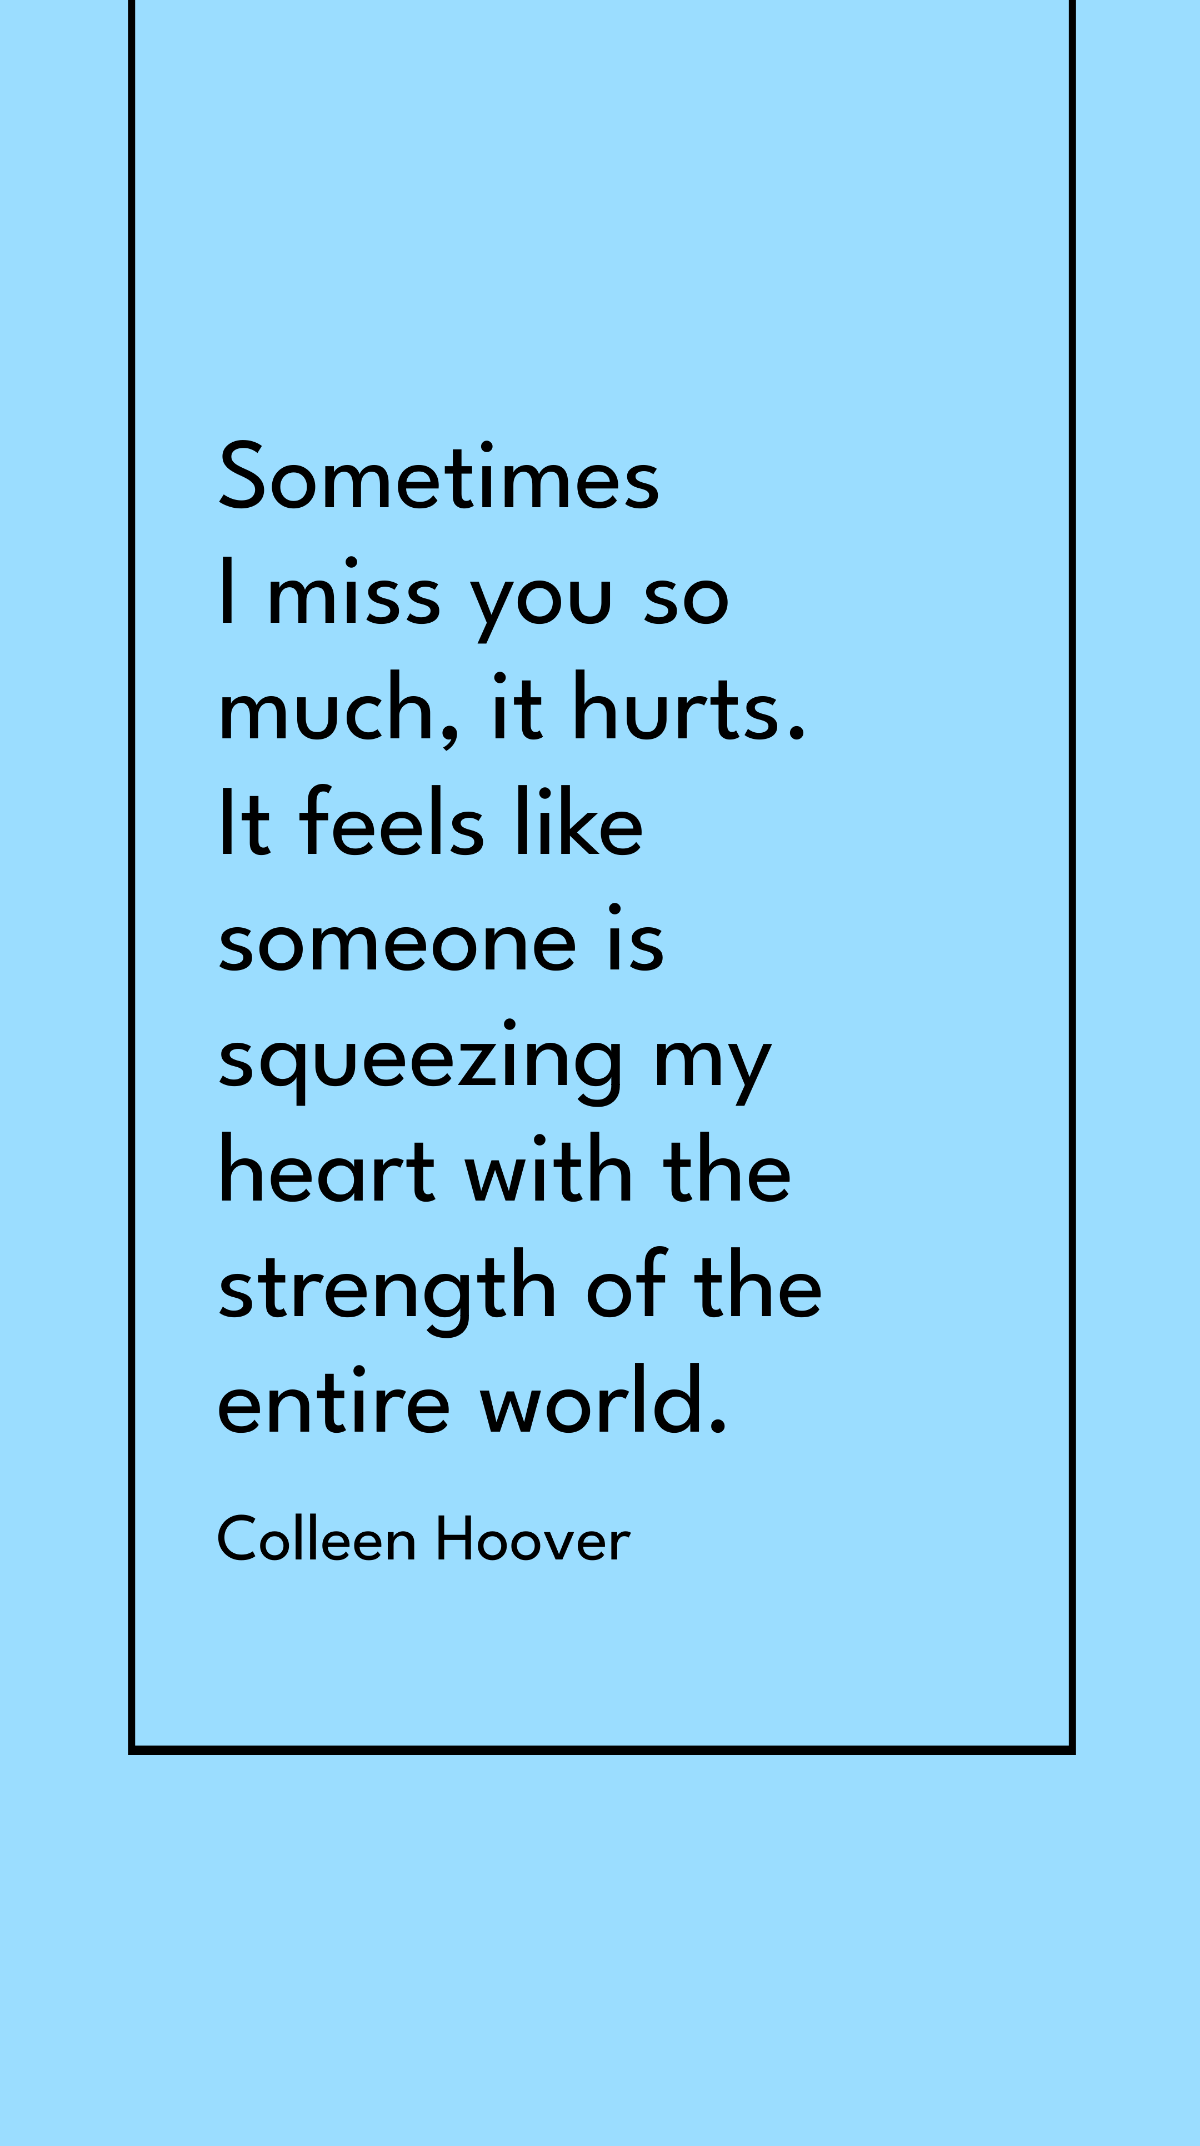 Colleen Hoover - Sometimes I miss you so much, it hurts. It feels like someone is squeezing my heart with the strength of the entire world.